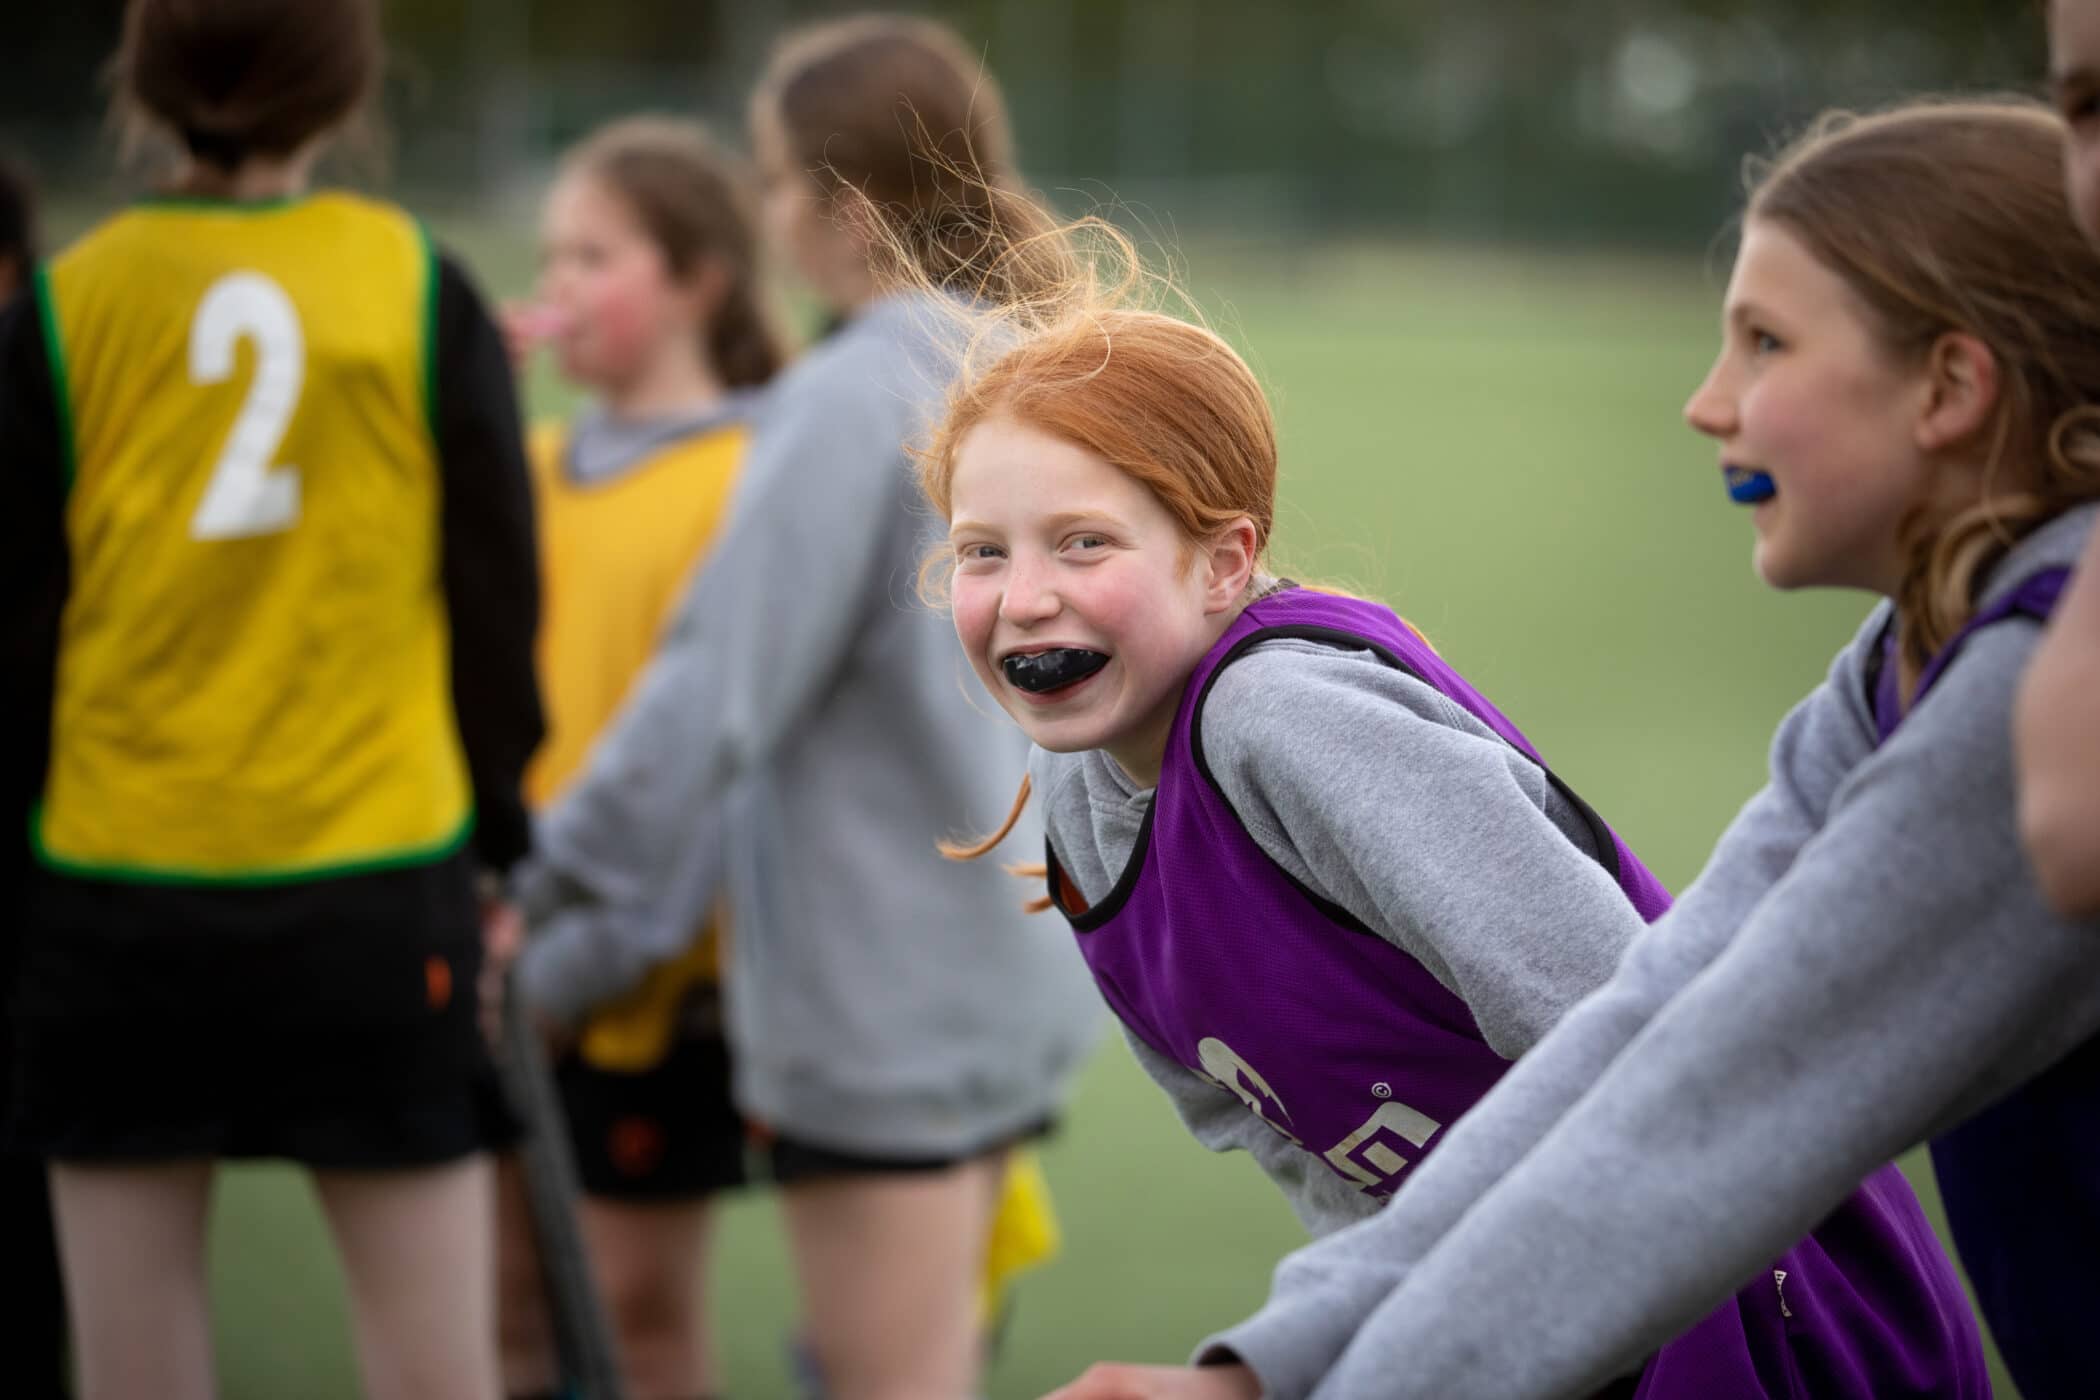 Smiling child with gumshield playing hockey